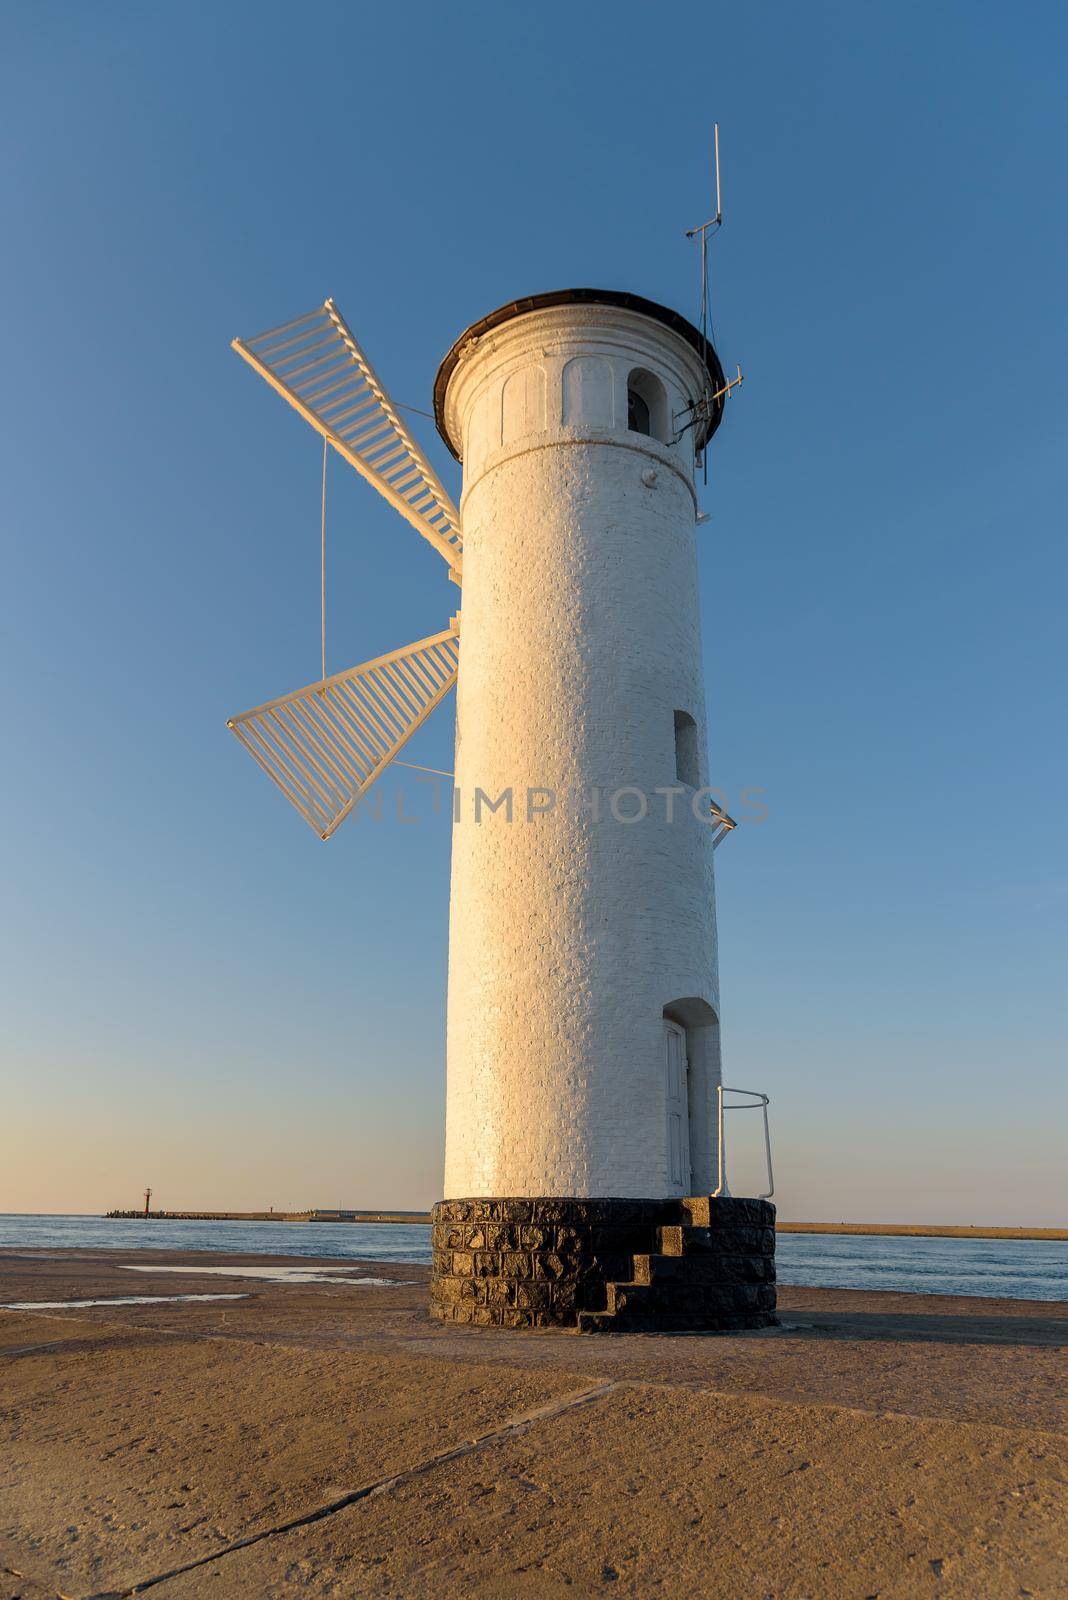 Stawa Mlyny an official symbol of Swinoujscie at sunset by mkos83